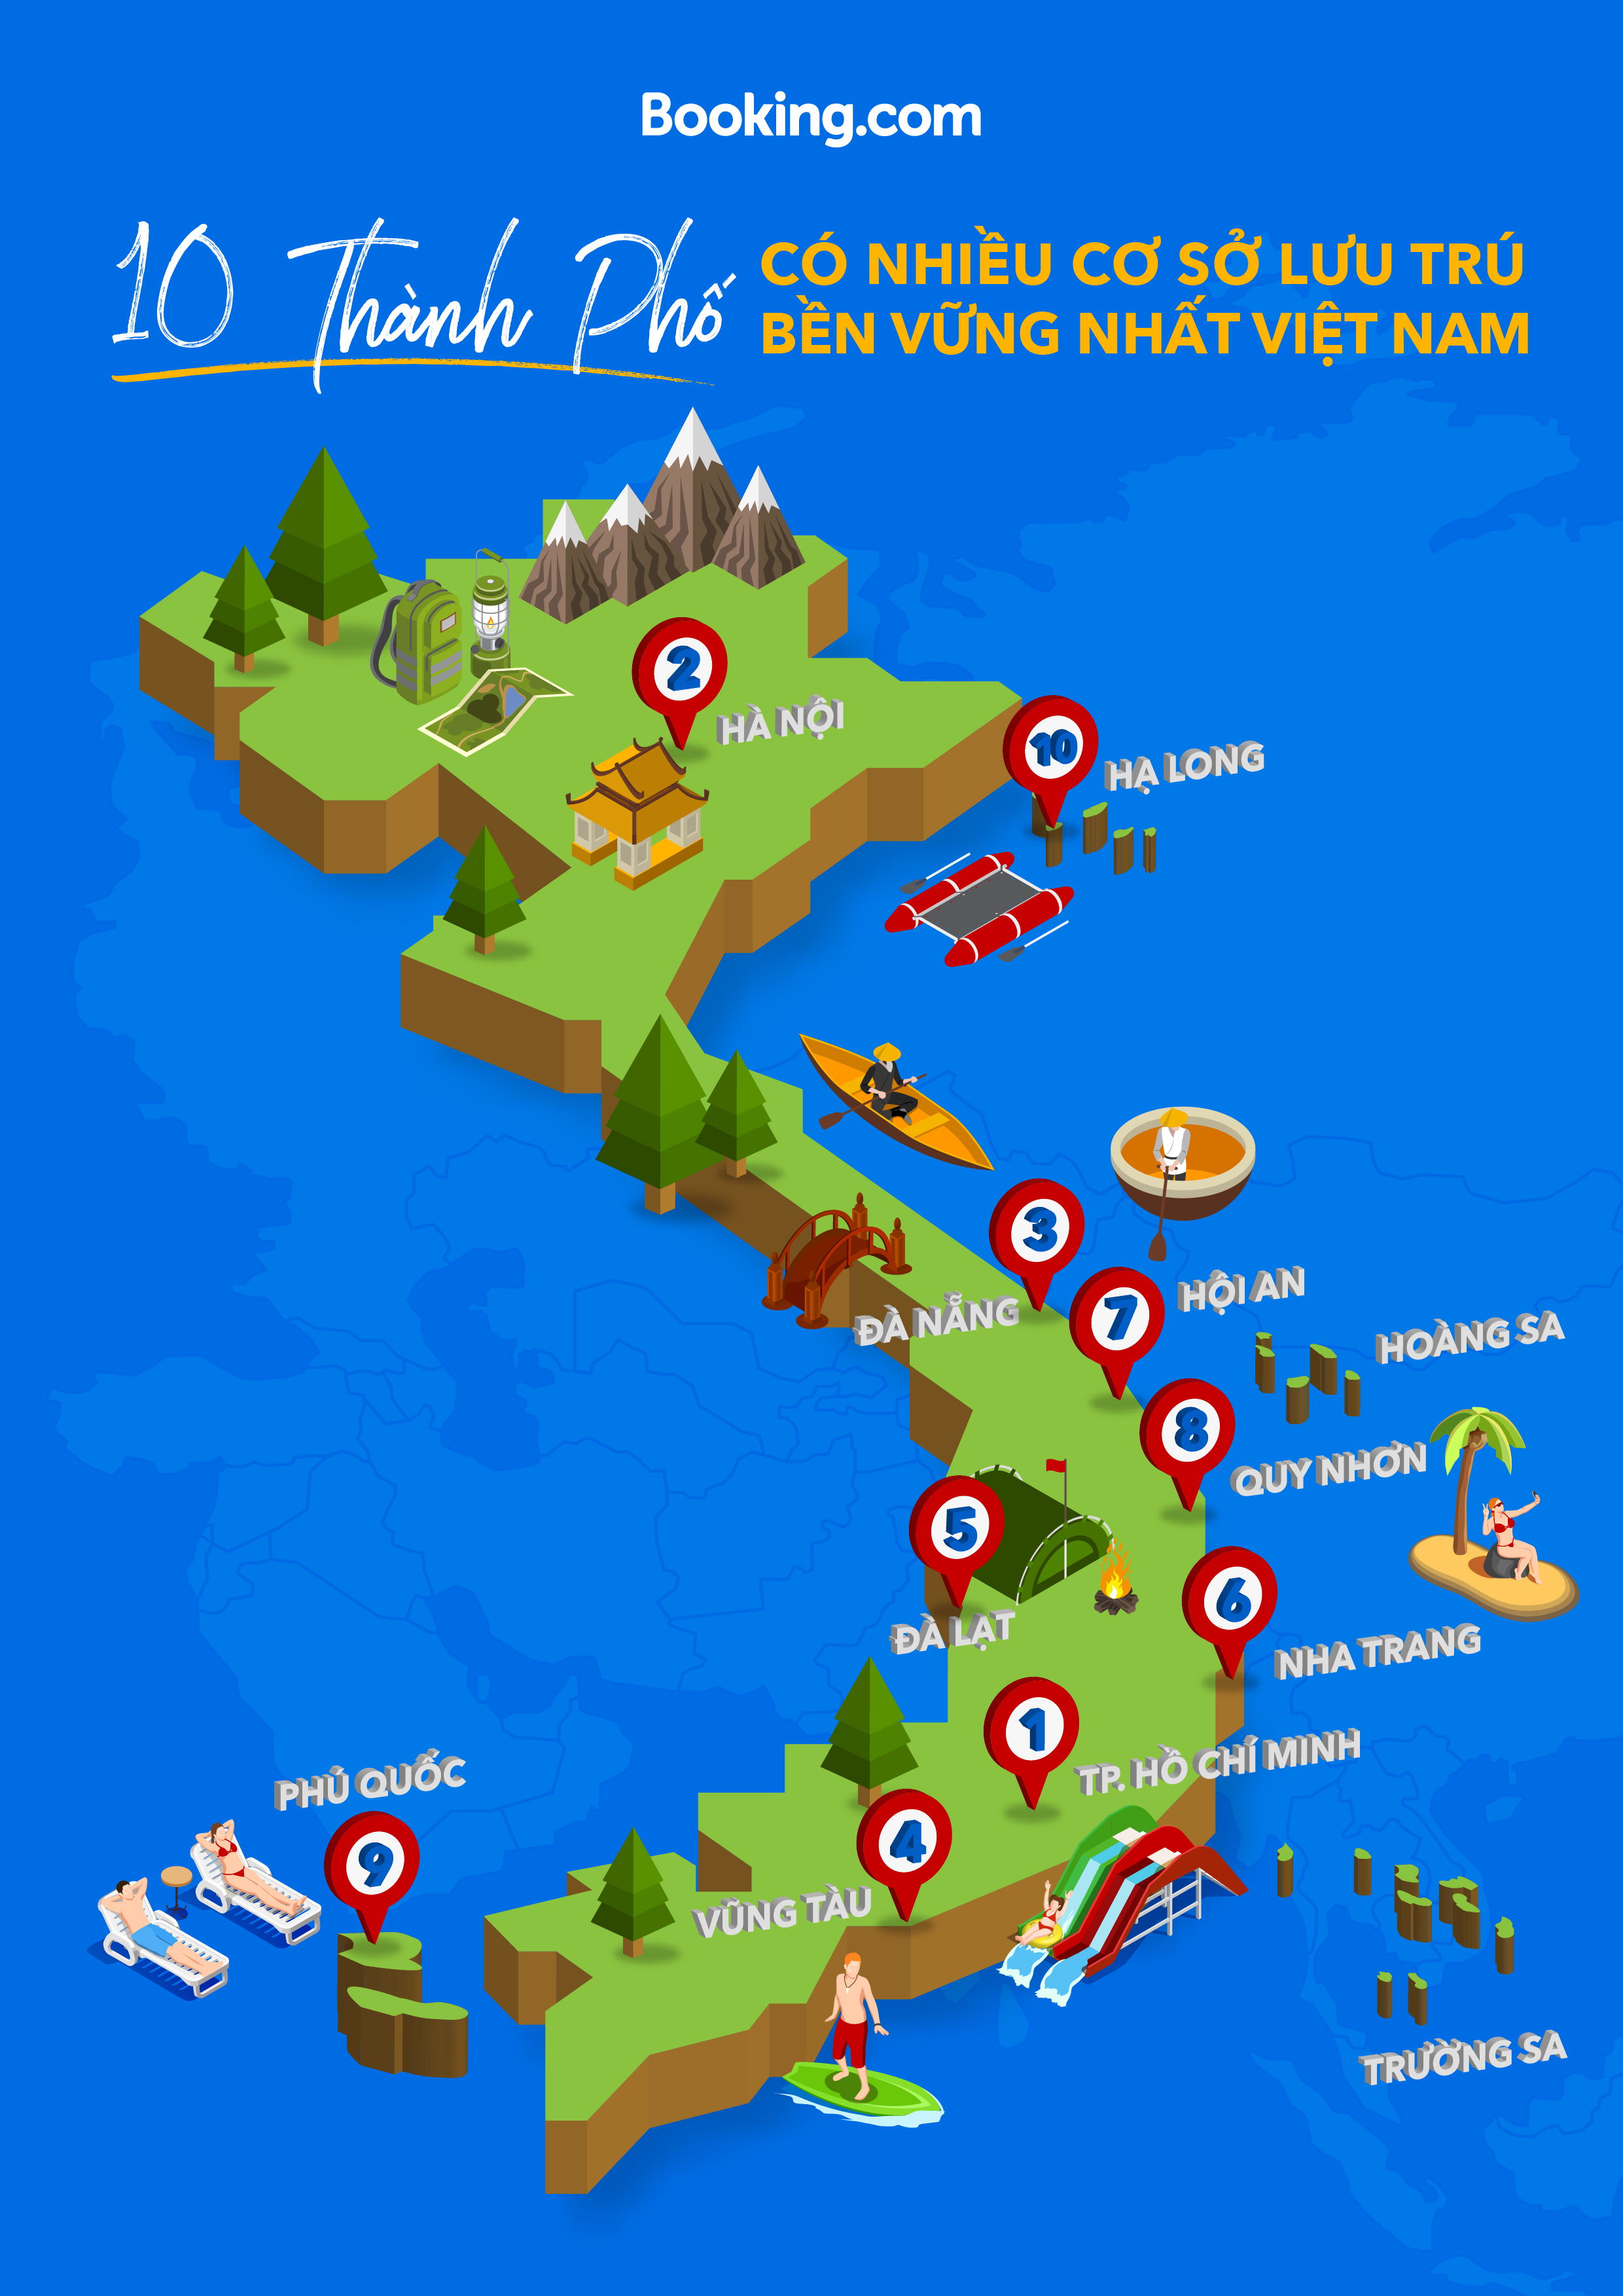 A supplied infographic shows destinations in Vietnam offering the highest number of sustainable stays with the Travel Sustainable Badge on Booking.com.